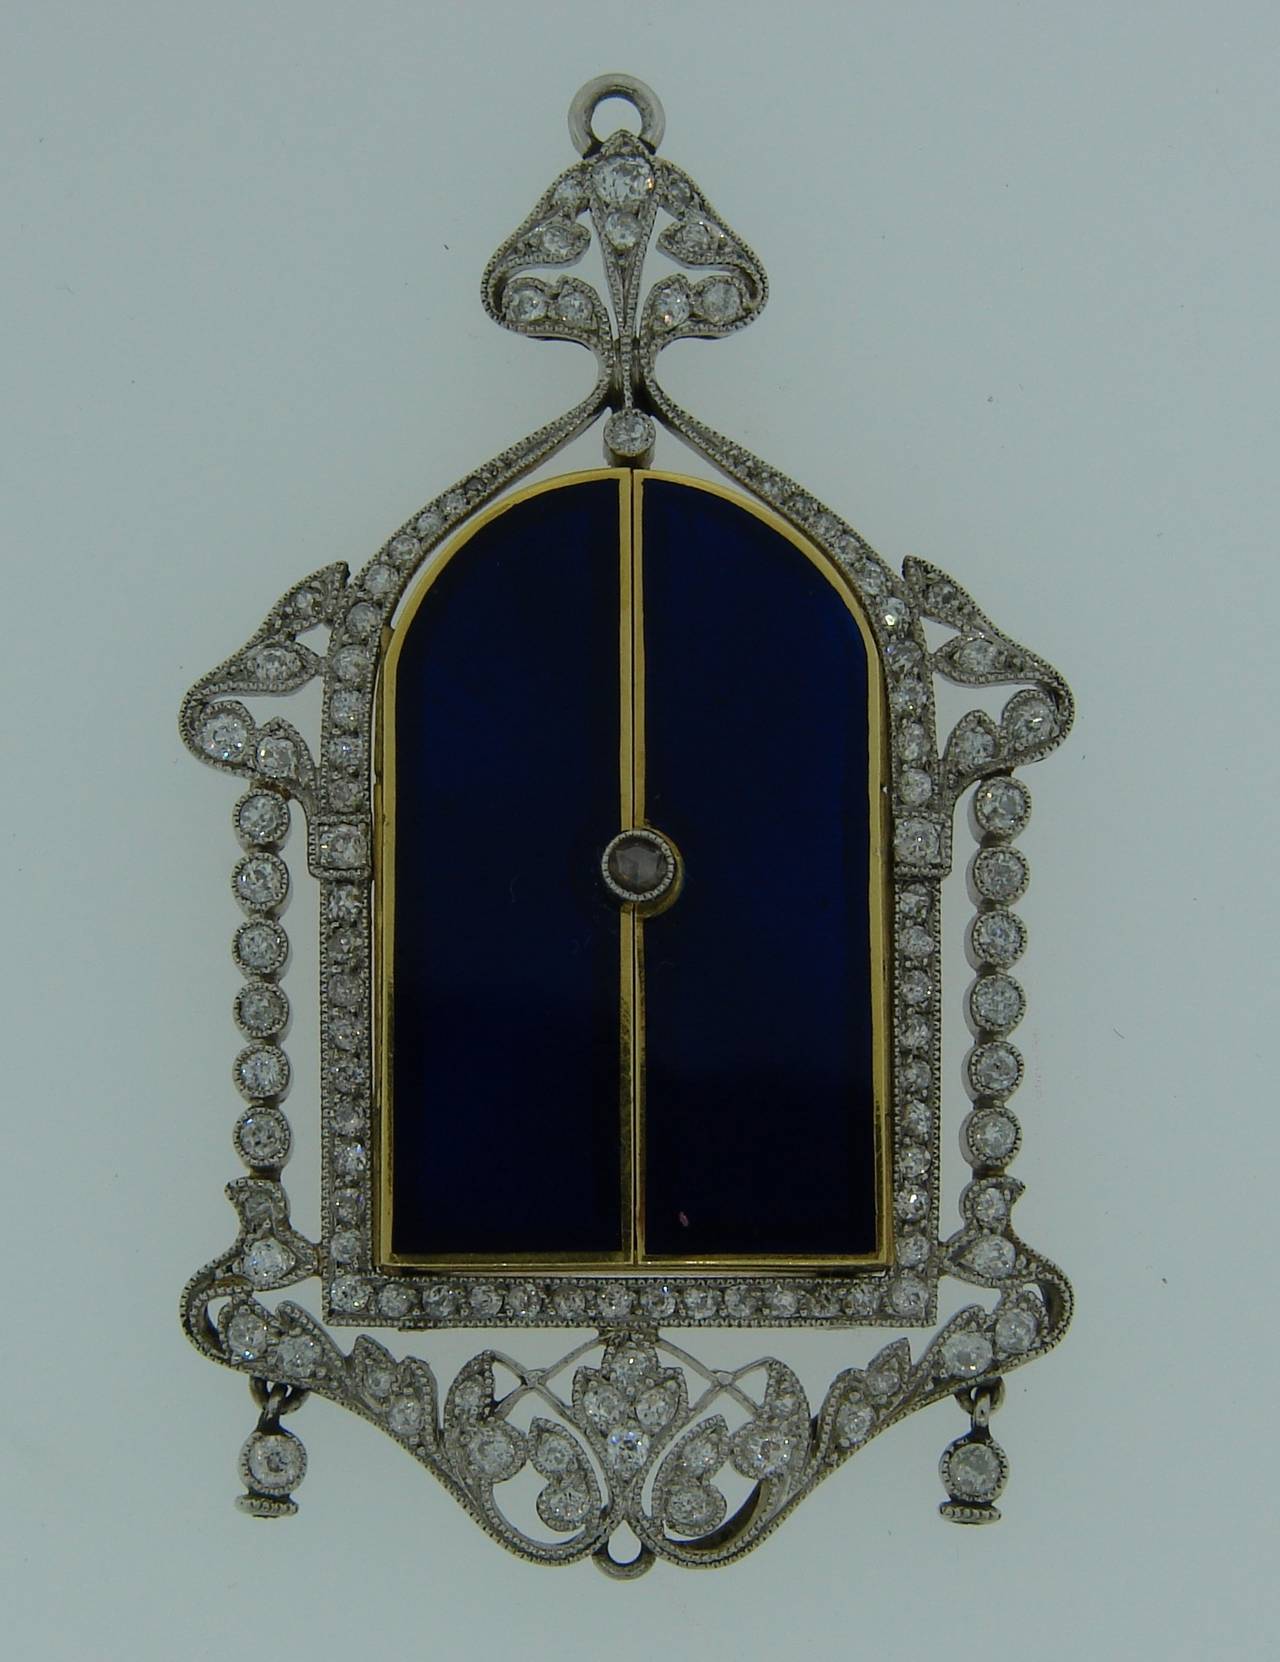 A unique piece of jewelry - a pendant / icon. An icon with two shutters that opens up and reveal a hand-painted Madonna. The icon is embedded in a delicate diamond & platinum frame. The icon is made of yellow gold and multi-colored enamel, the